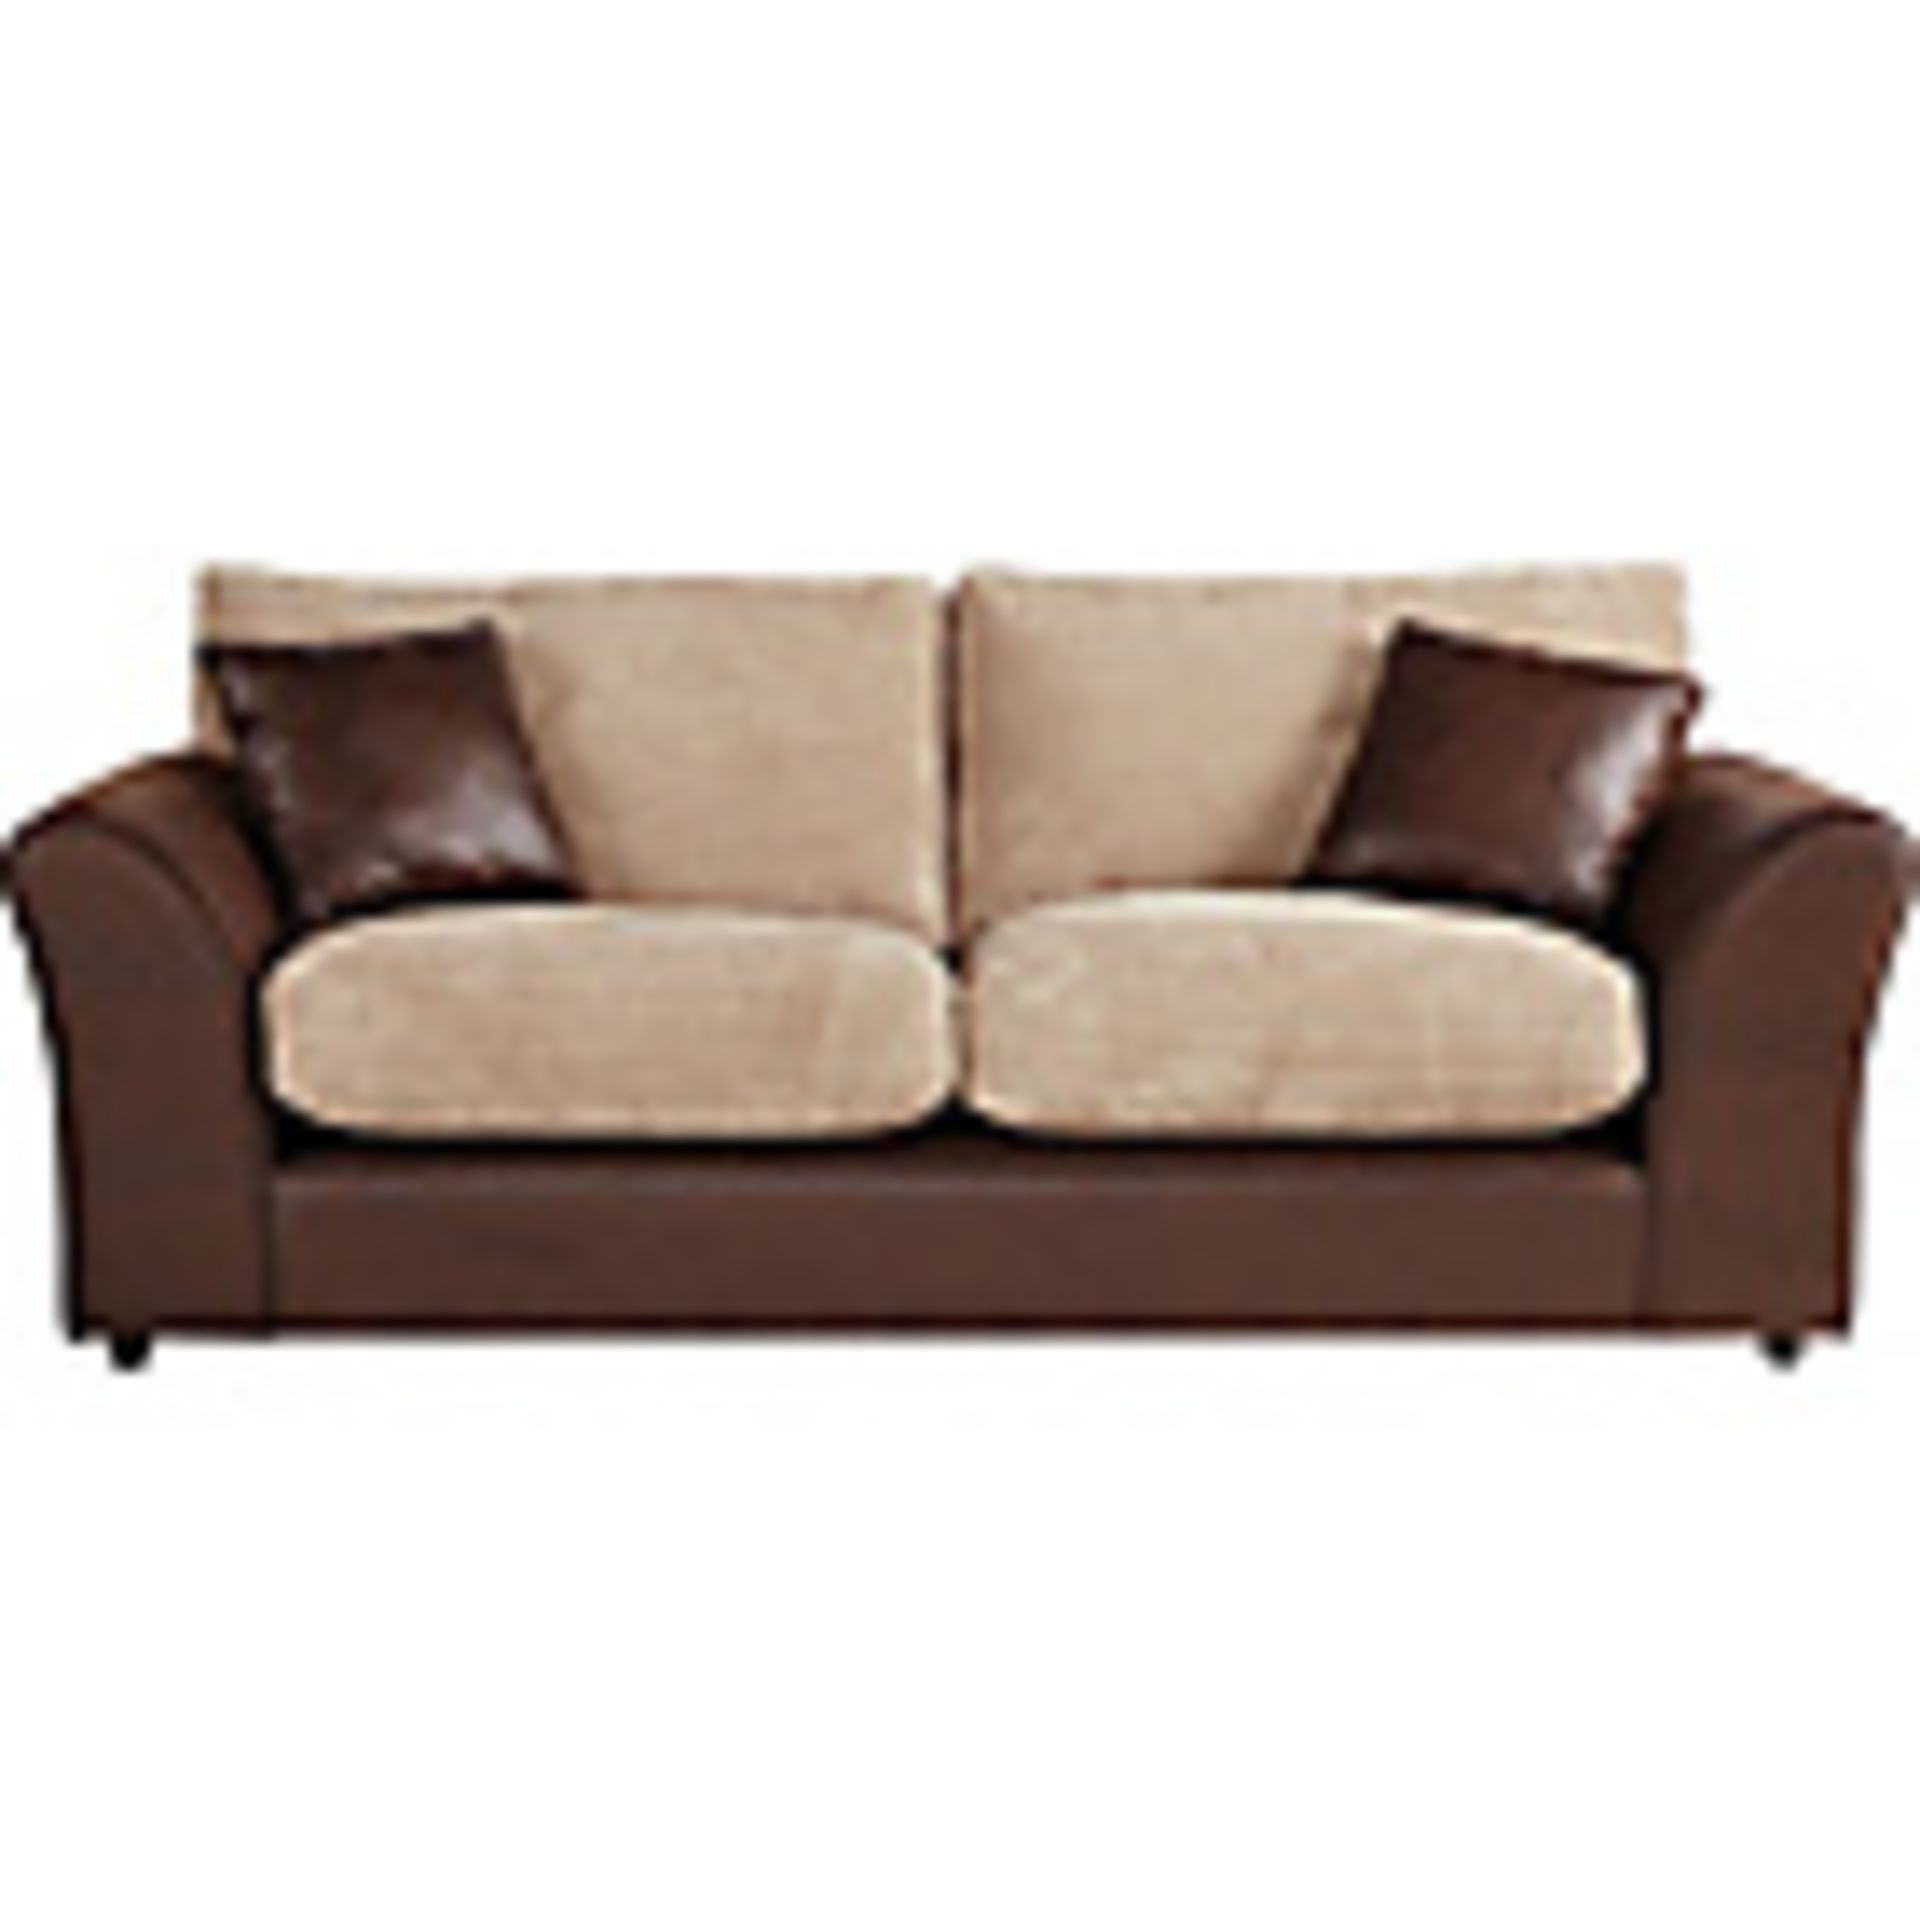 Brand new direct from the manufacturers 3 seater and 2 seater Zakira sofas designed with a brown